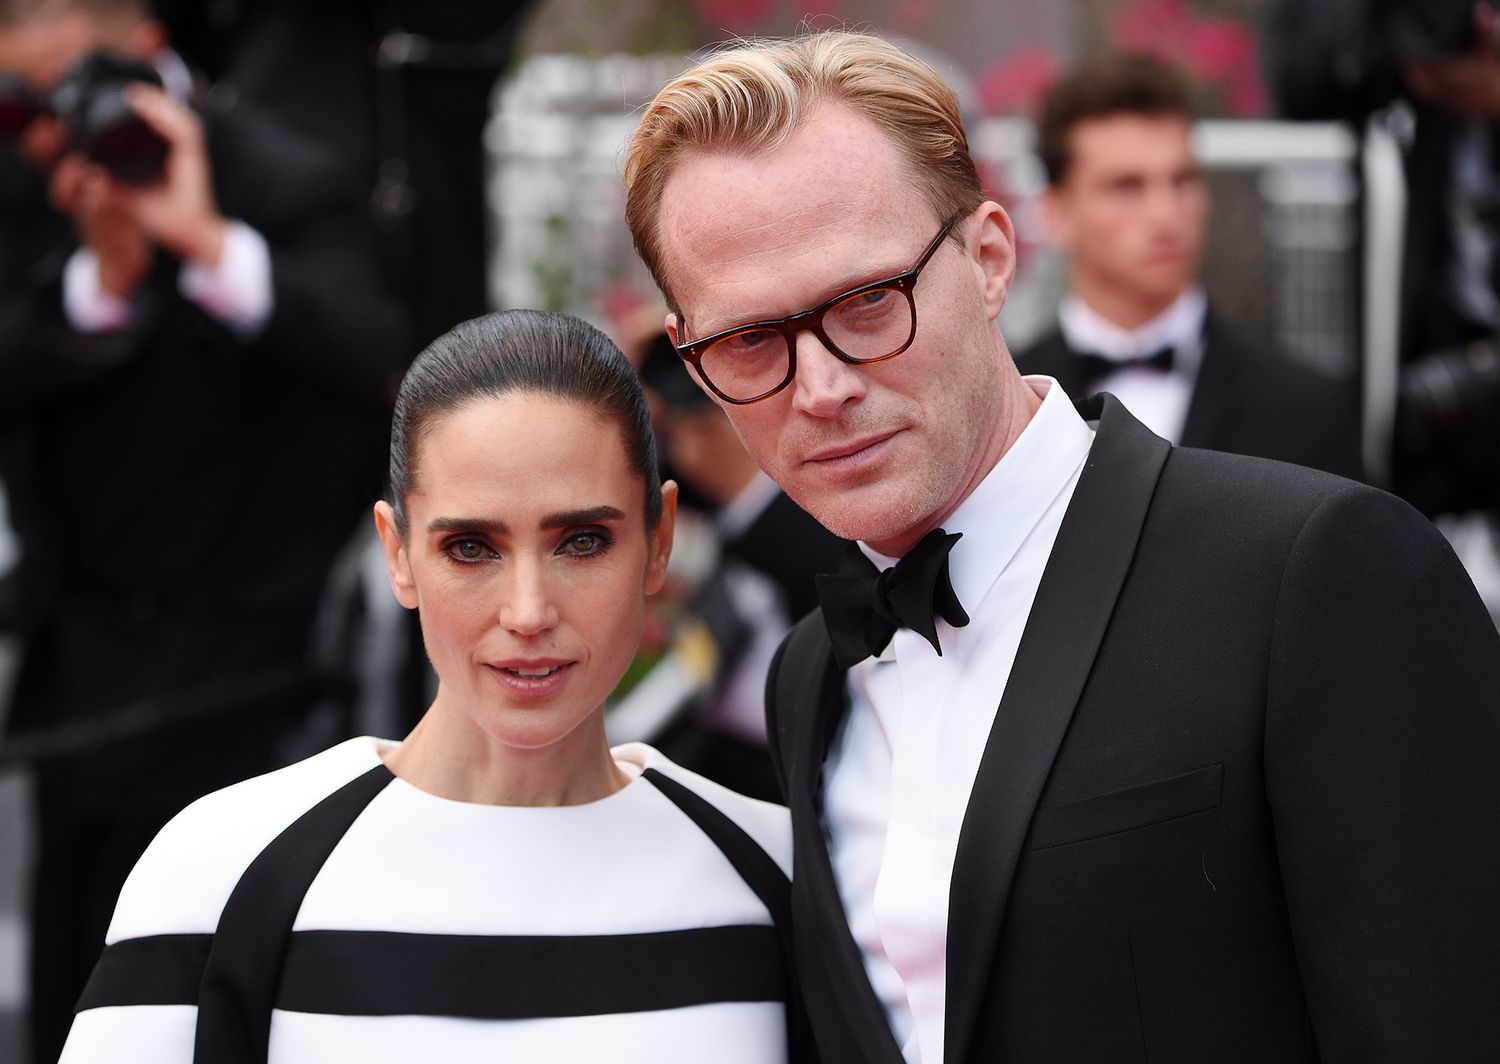 Jennifer Connelly and Paul Bettany attend the screening of "Solo: A Star Wars Story" during the 71st annual Cannes Film Festival at Palais des Festivals on May 15, 2018 in Cannes, France